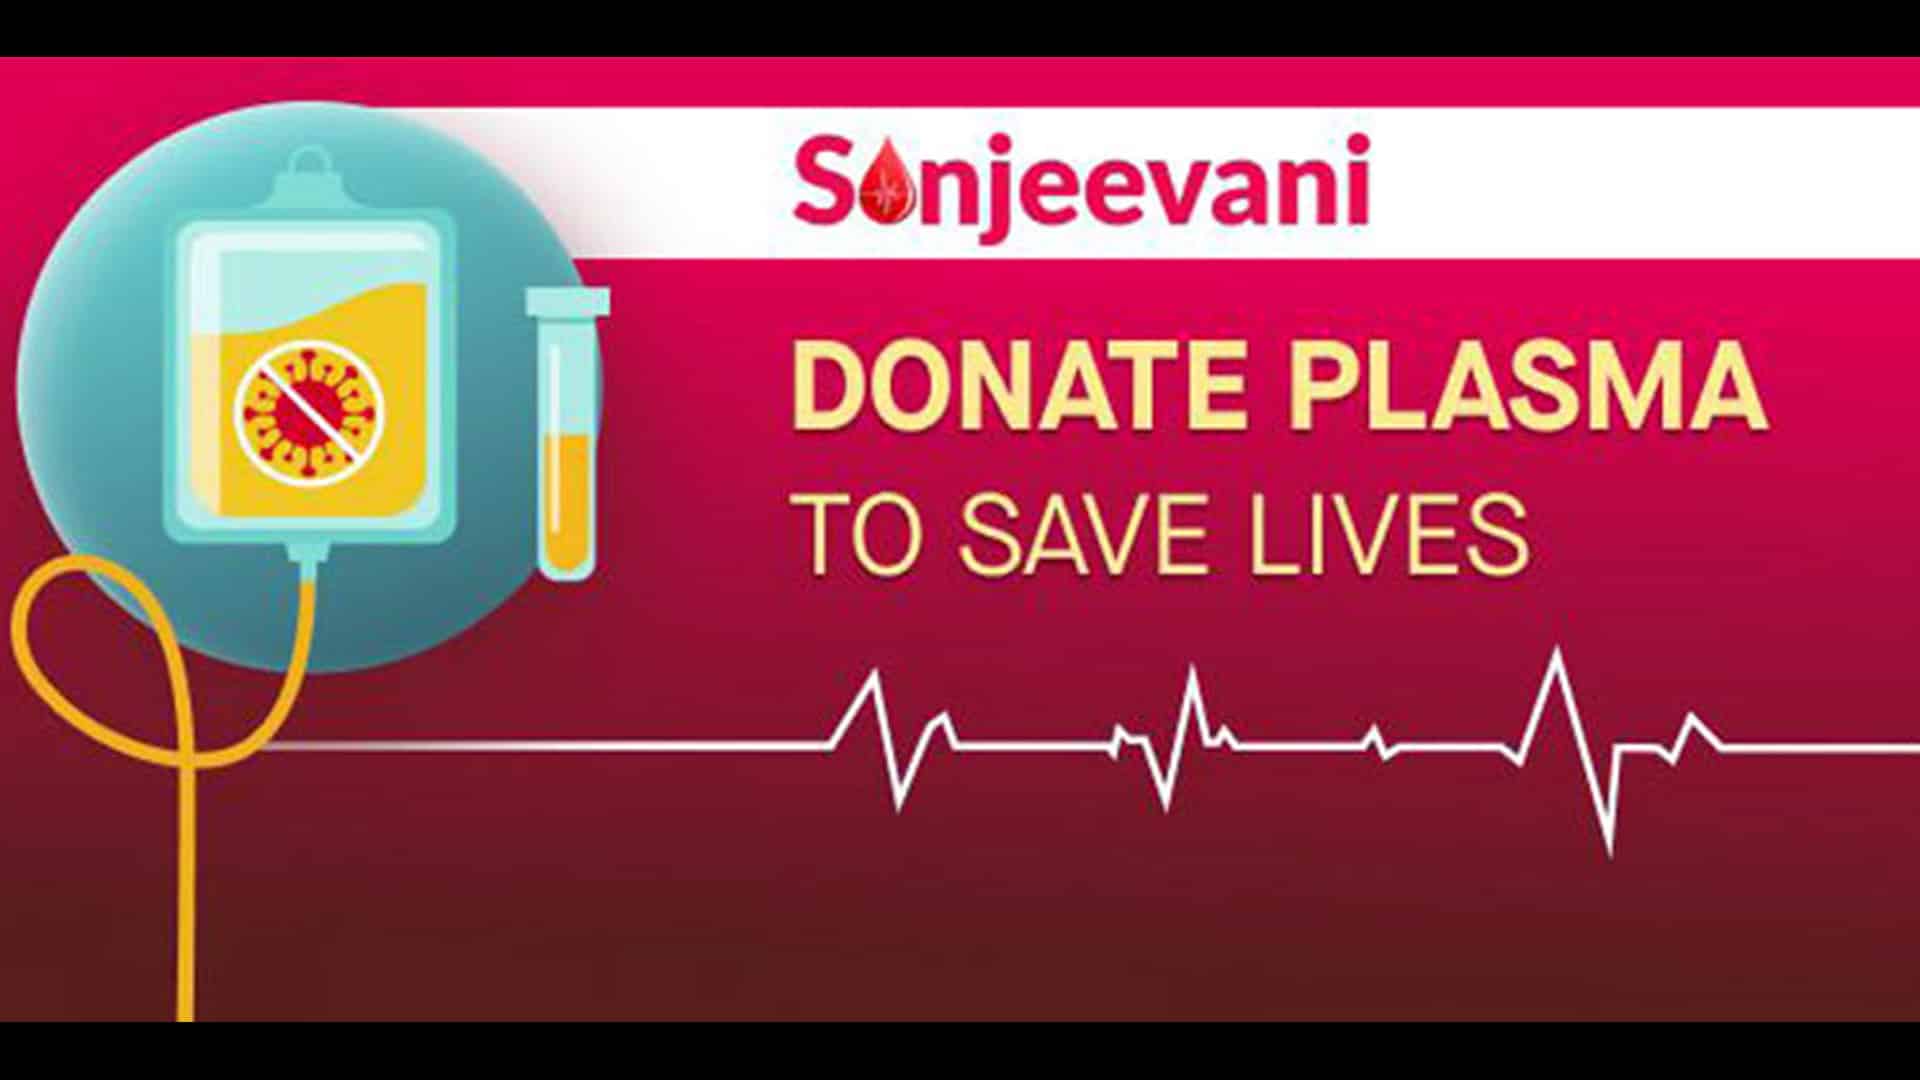 Snapdeal launches Sanjeevani app to help COVID patients connect with potential plasma donors